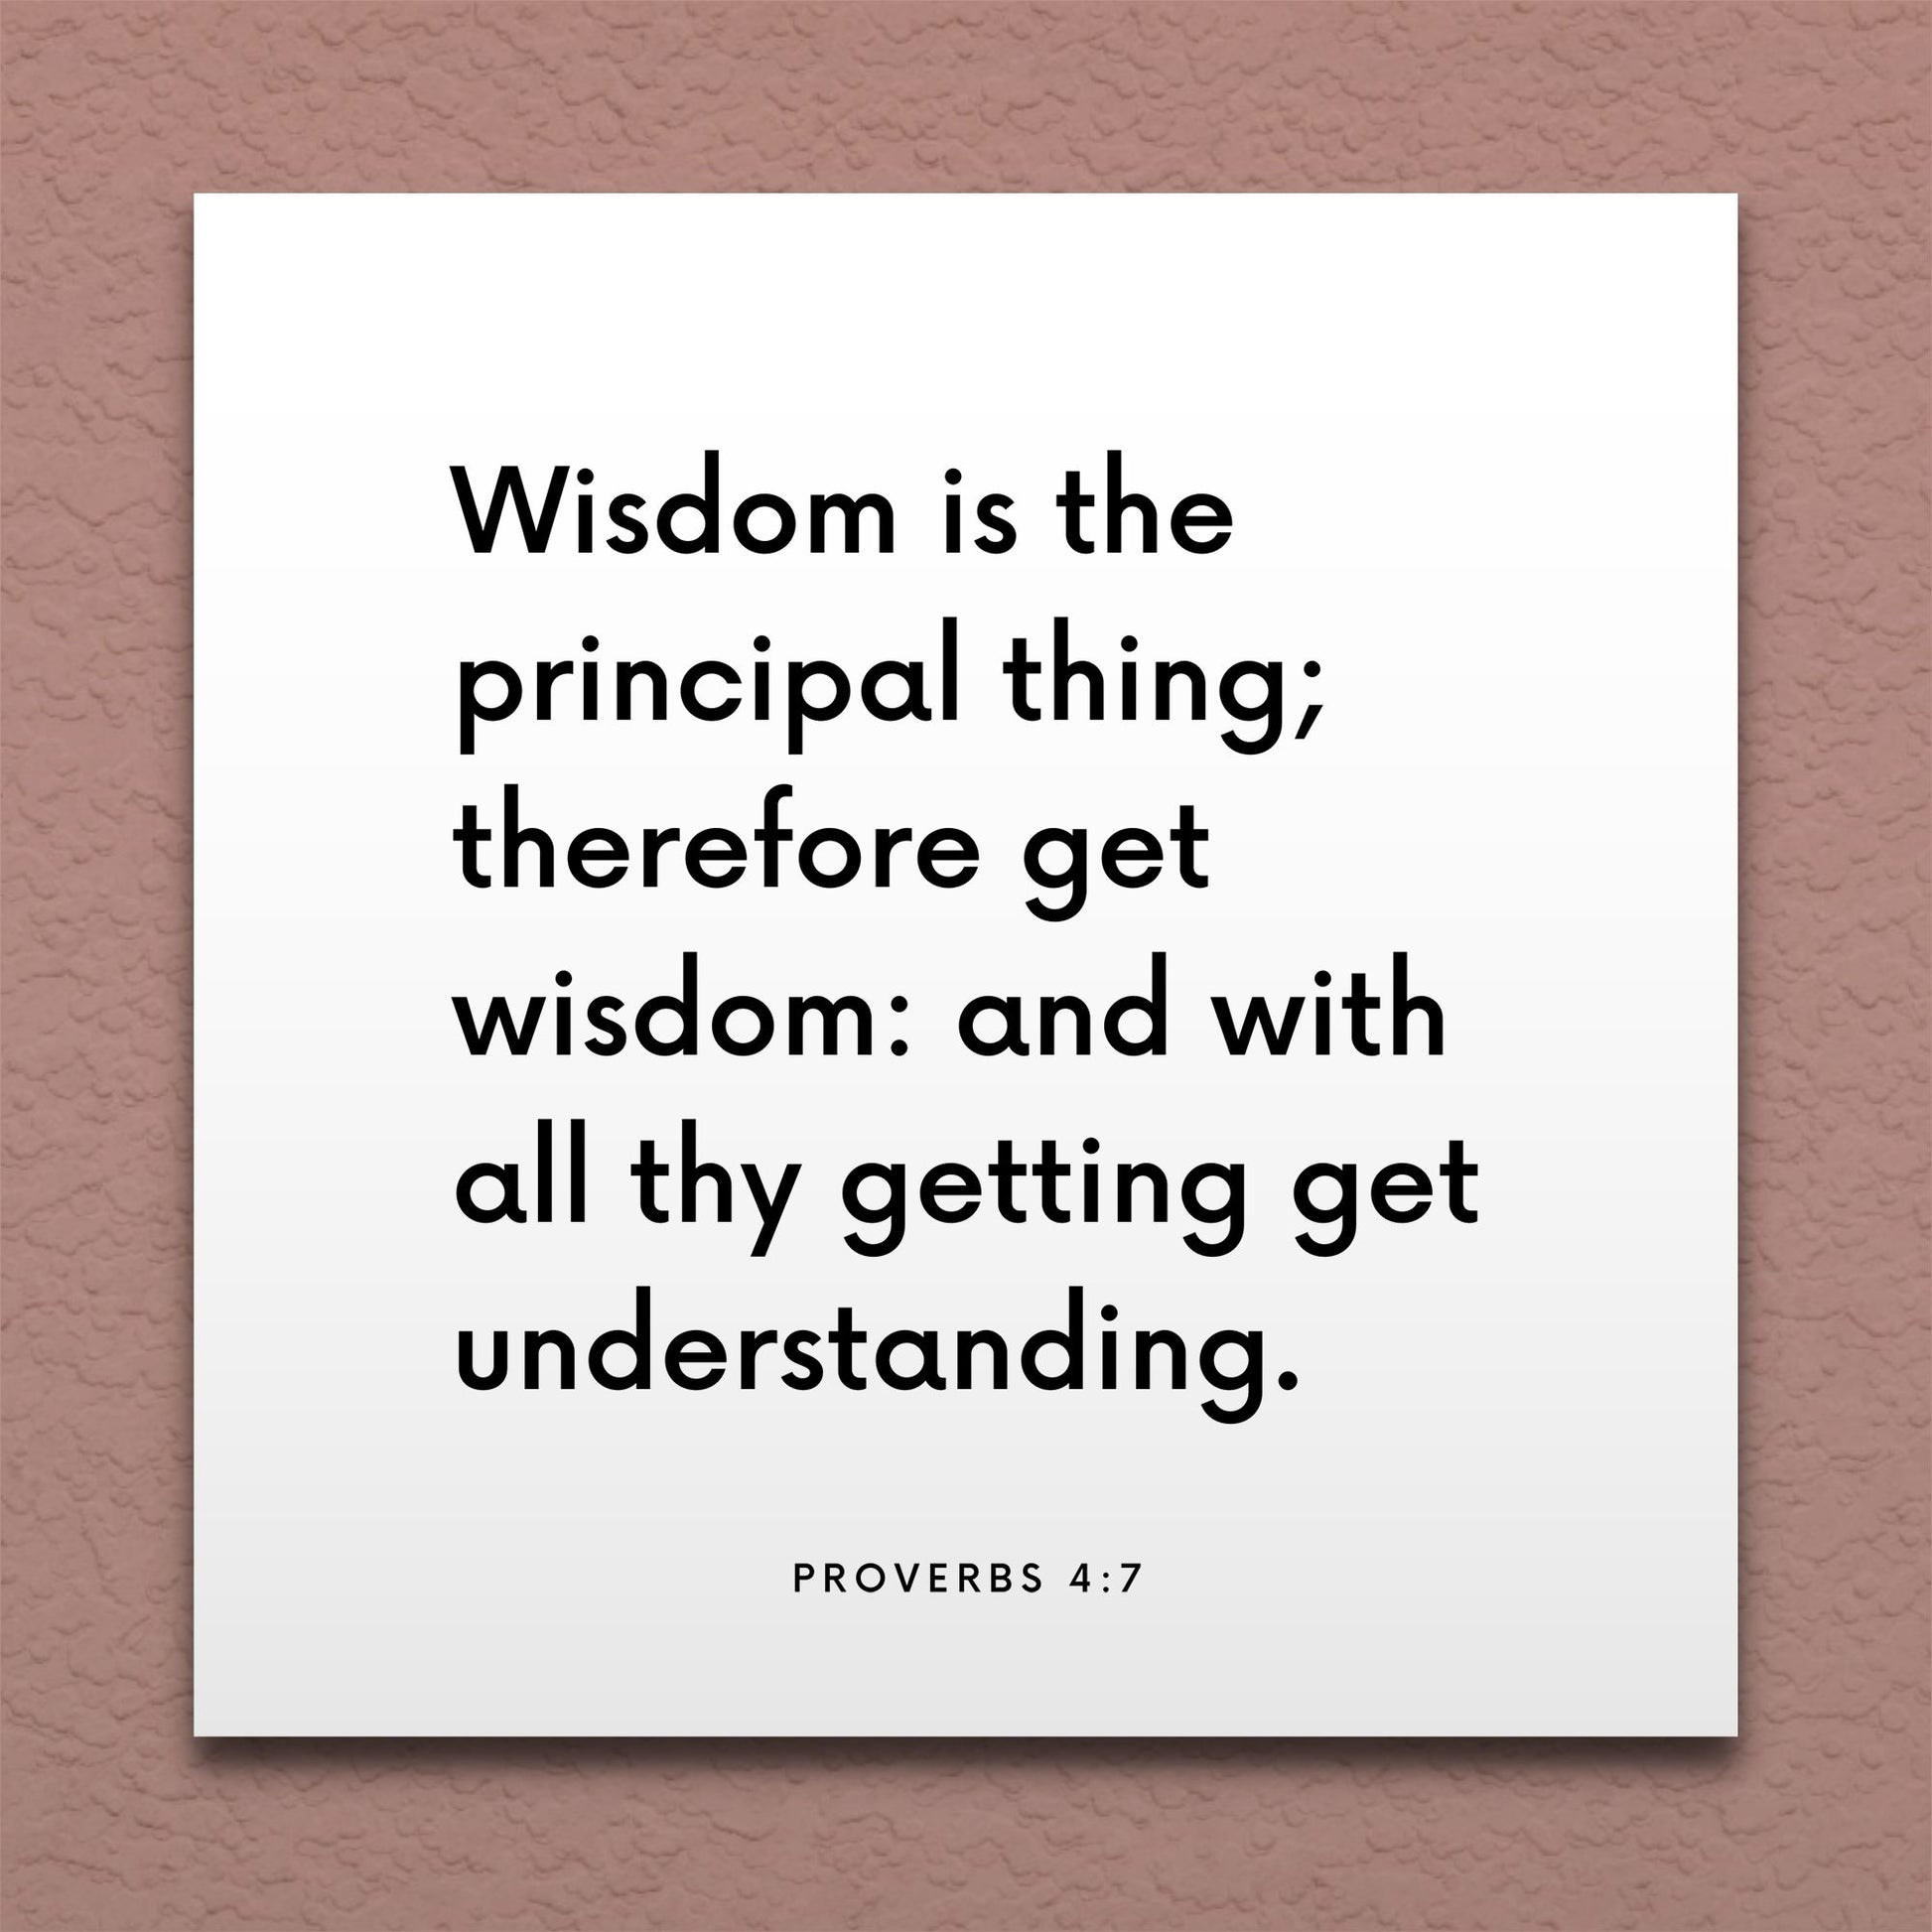 Wall-mounted scripture tile for Proverbs 4:7 - "Wisdom is the principal thing; therefore get wisdom"